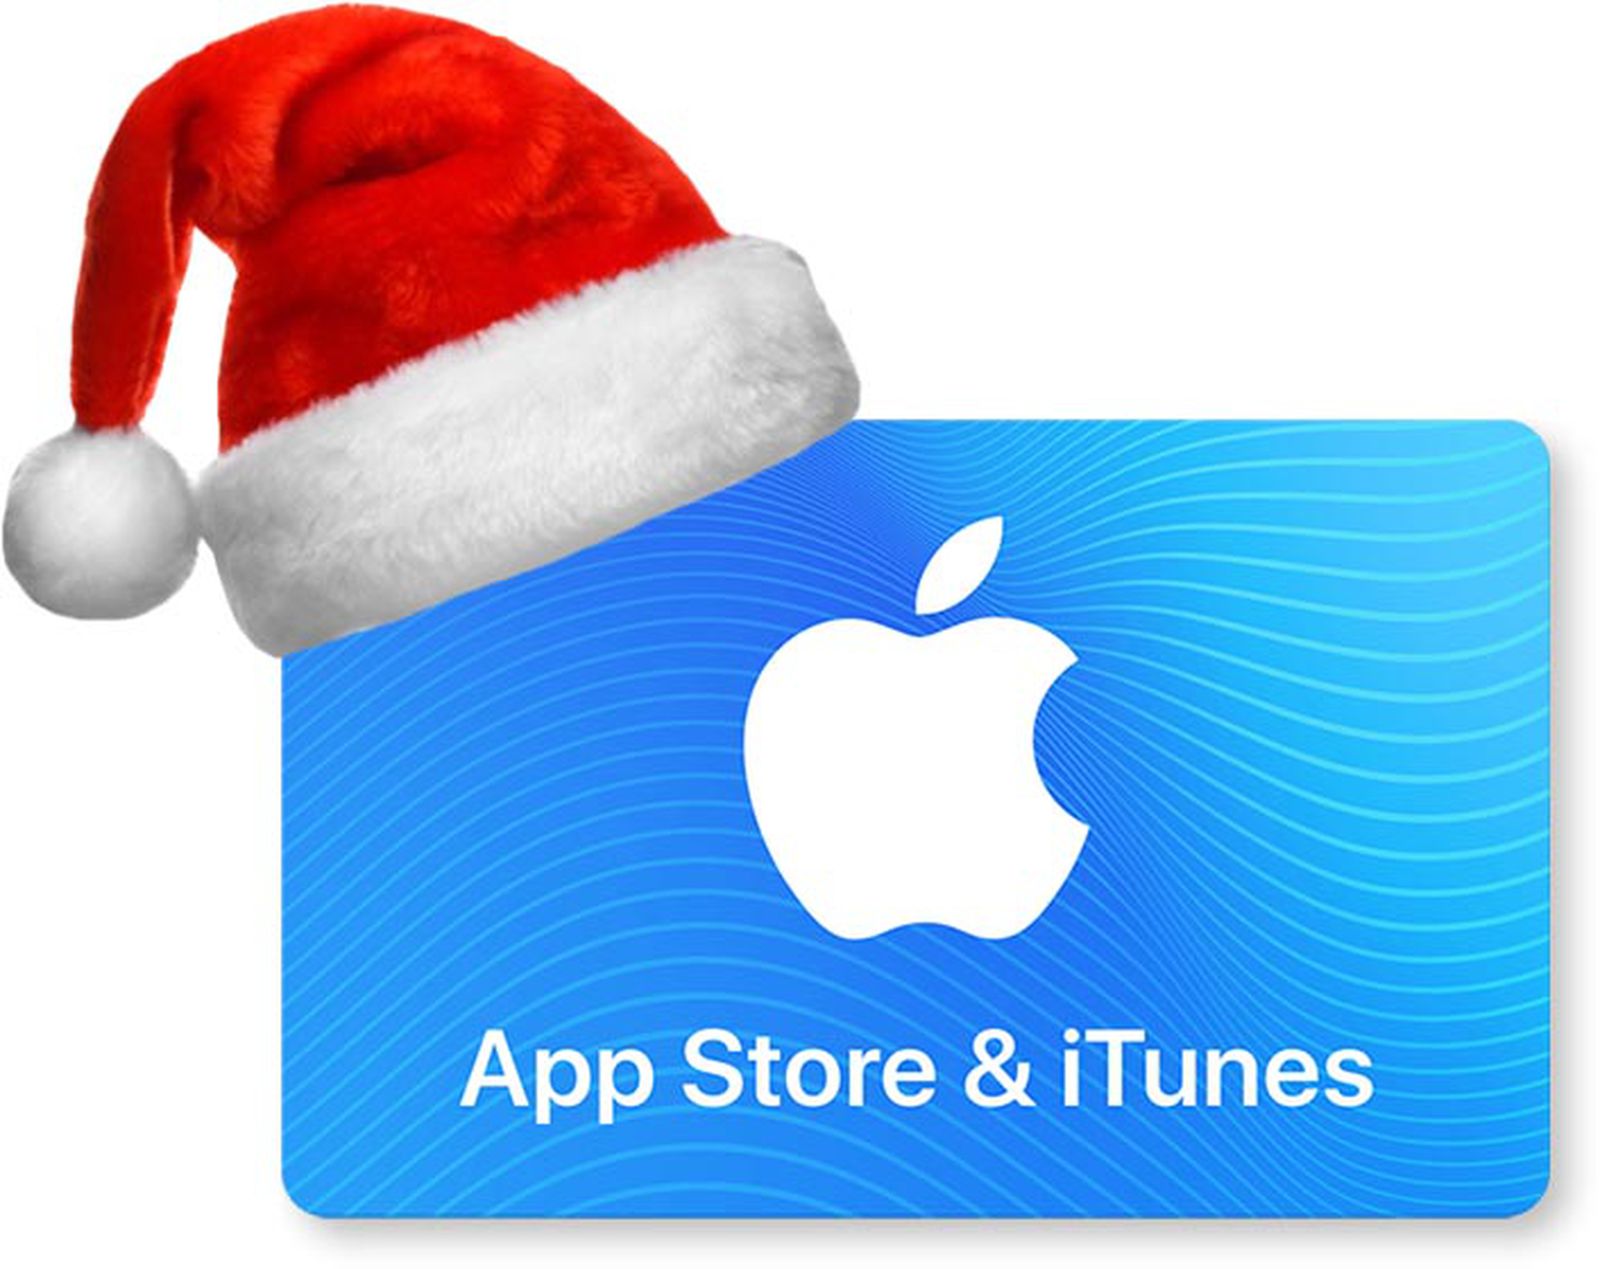  Apple Gift Card - App Store, iTunes, iPhone, iPad, AirPods,  MacBook, accessories and more (Email Delivery): Gift Cards